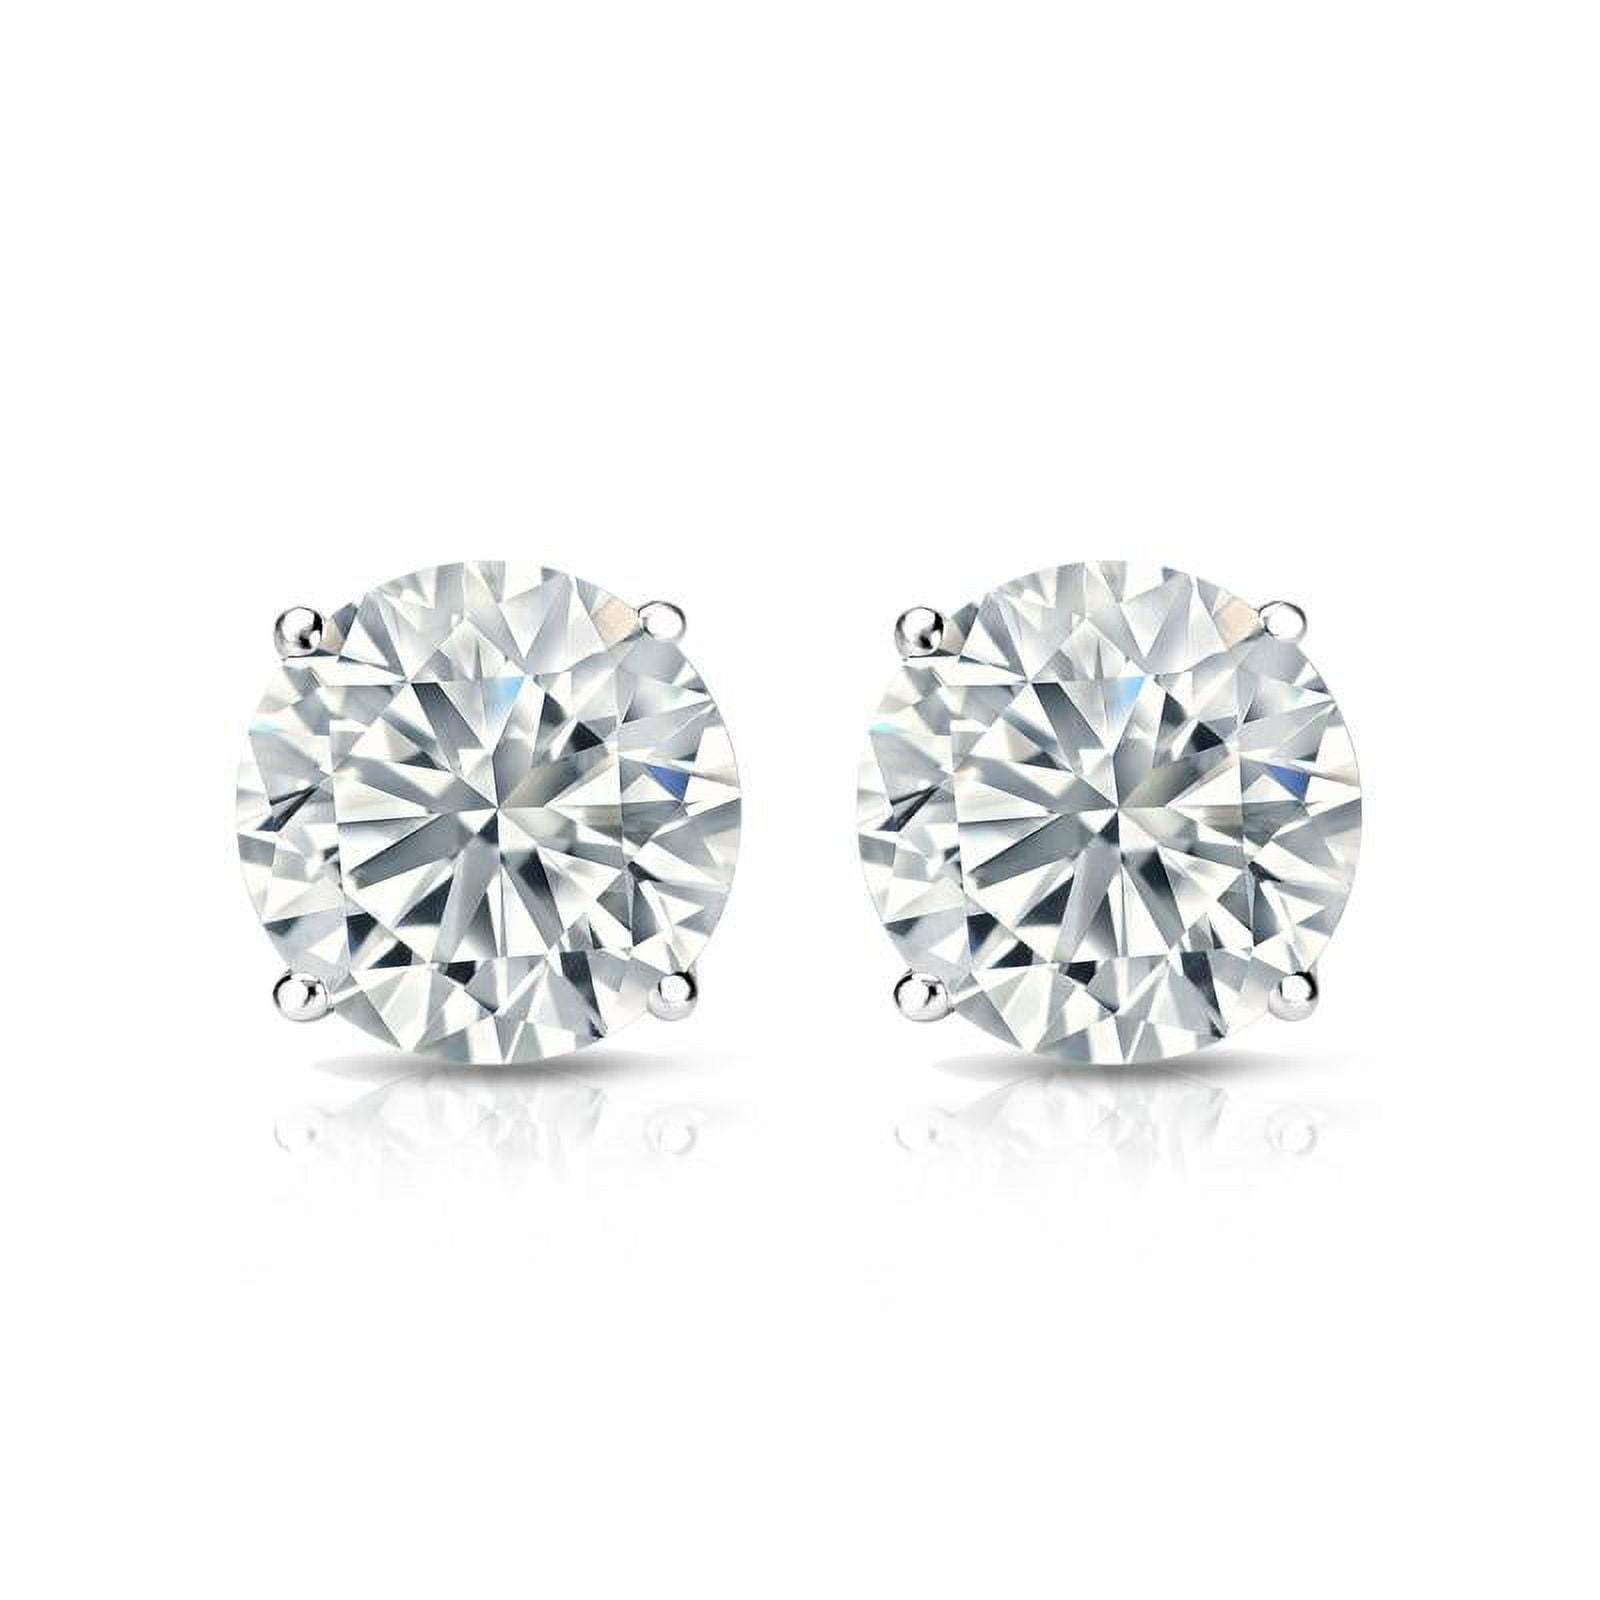 JeenMata 4 Prong 2 Carat Round Shaped Moissanite Solitaire Stud Earrings In 18K White Gold Plating Over Silver 43217233 b0e4 4938 8a08 d79924fd17f3.ad22f04af29def98d8b1cb02da462cd1